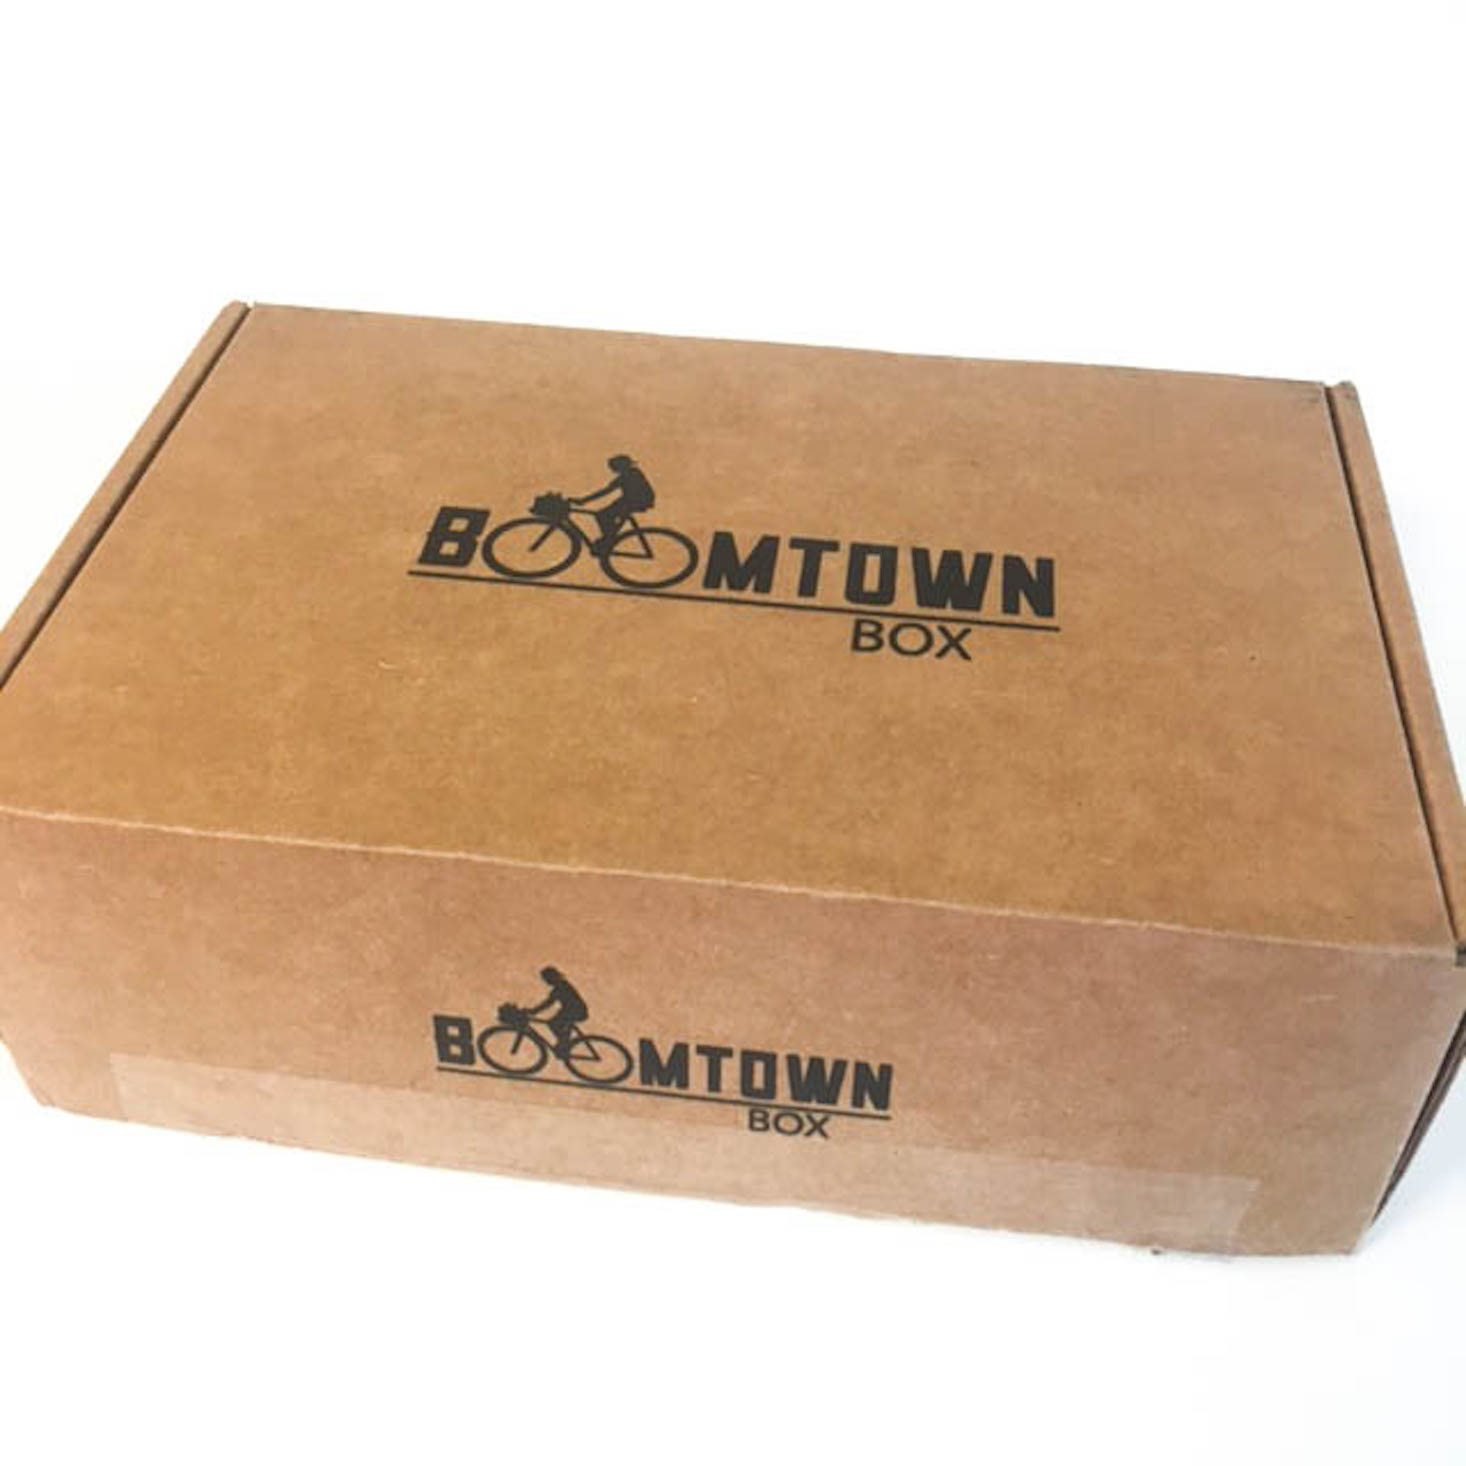 Boomtown Box Subscription Review + Coupon – October 2017